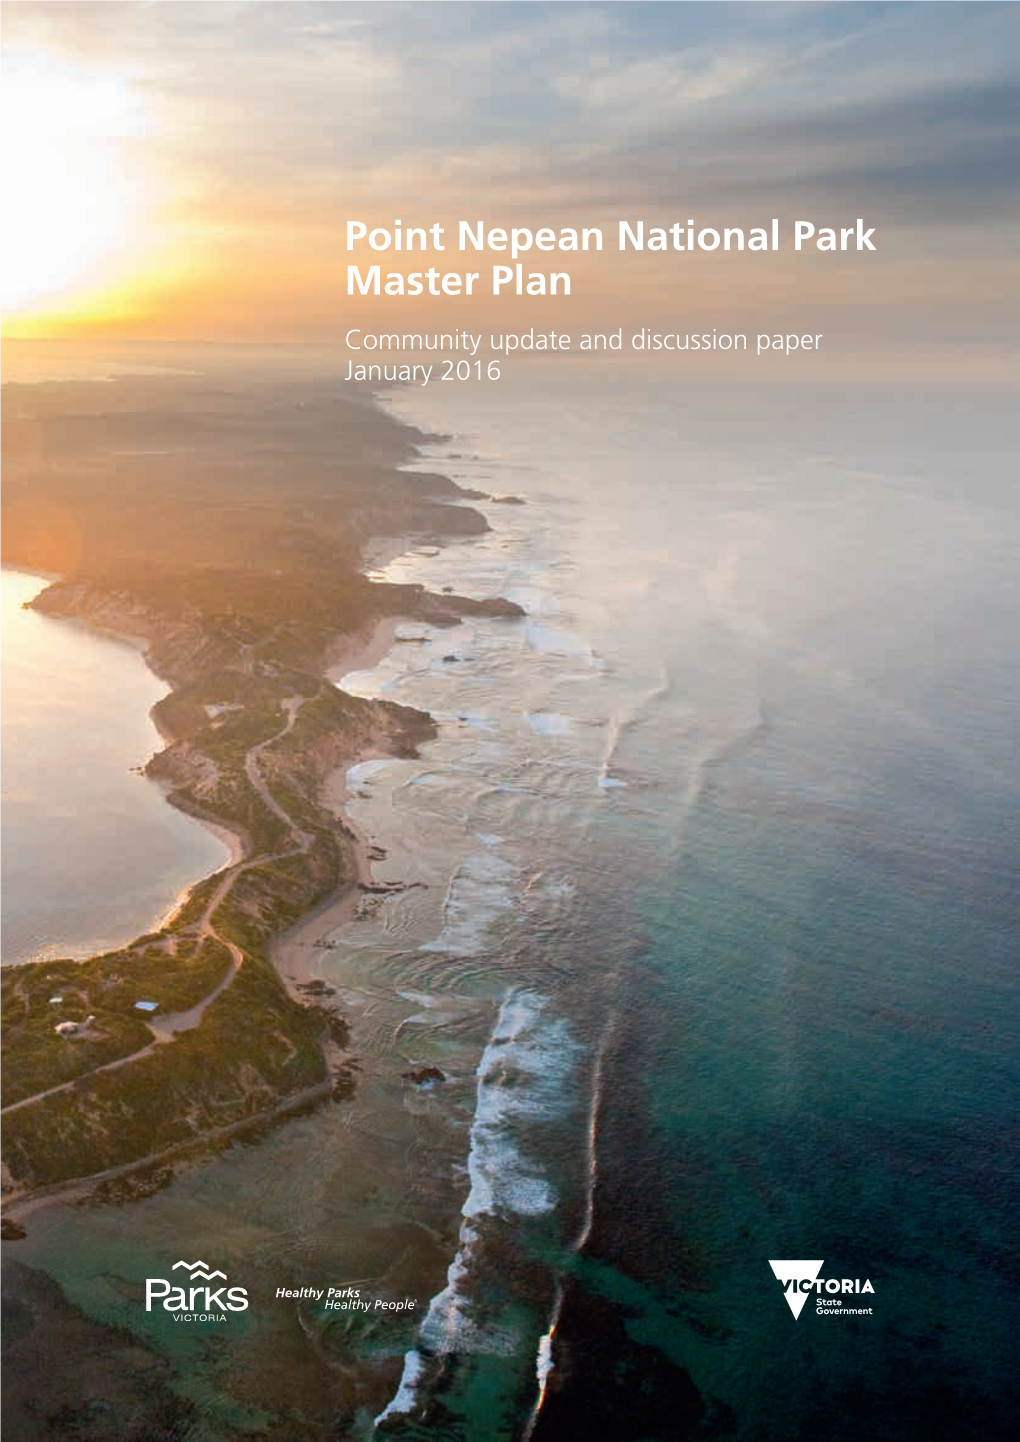 Point Nepean National Park Master Plan Community Update and Discussion Paper January 2016 Purpose